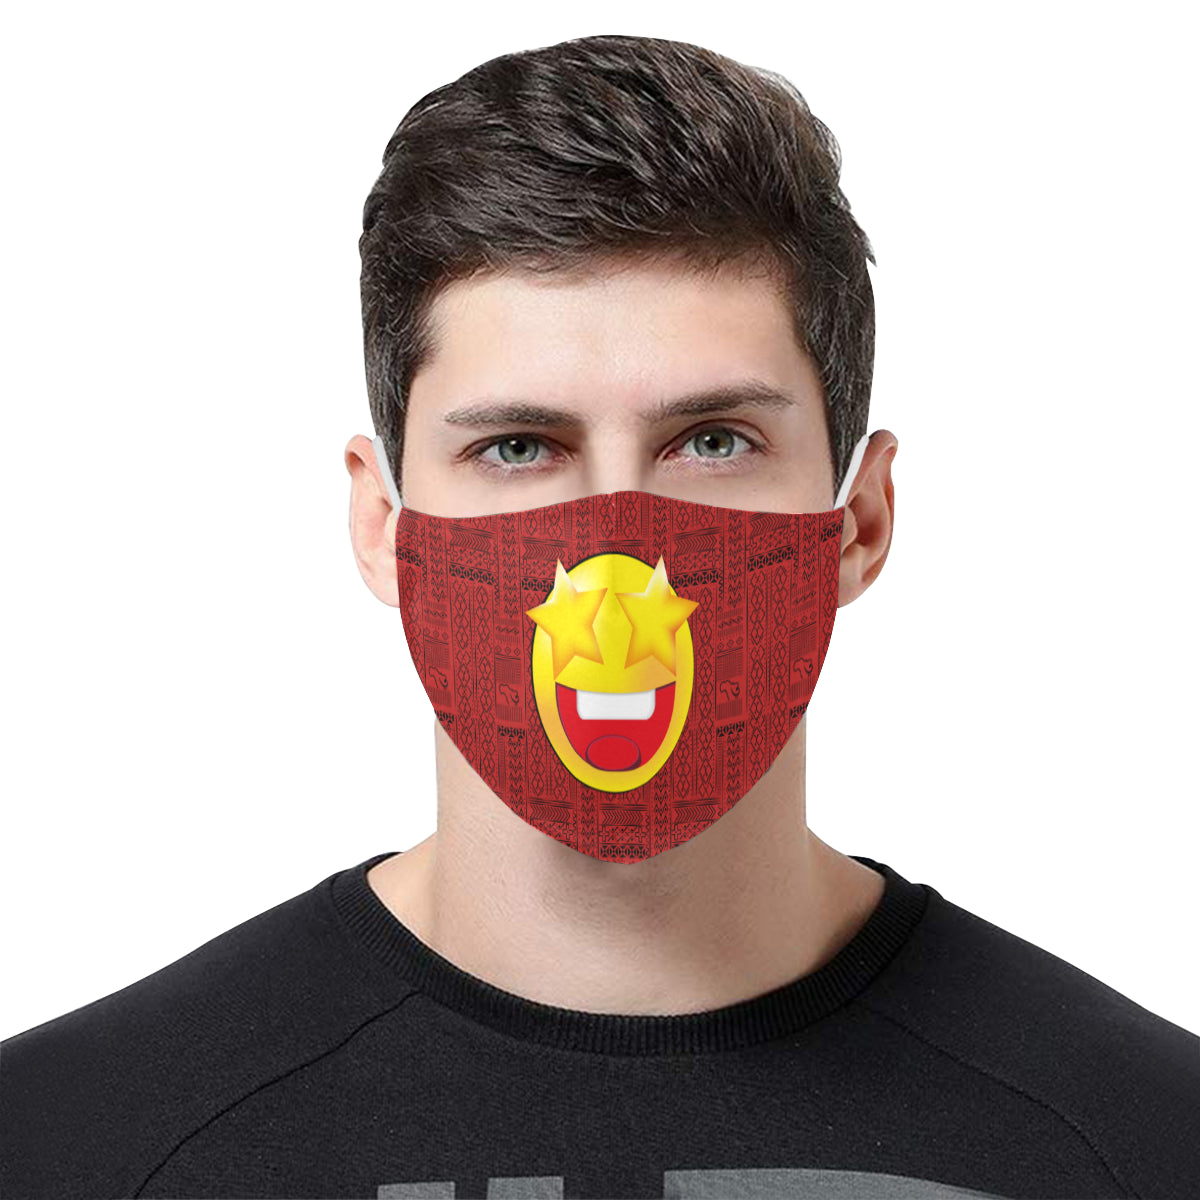 Star Tribal Print Emoji Cotton Fabric Face Mask with Filter Slot & Adjustable Strap - Non-medical use (2 Filters Included)